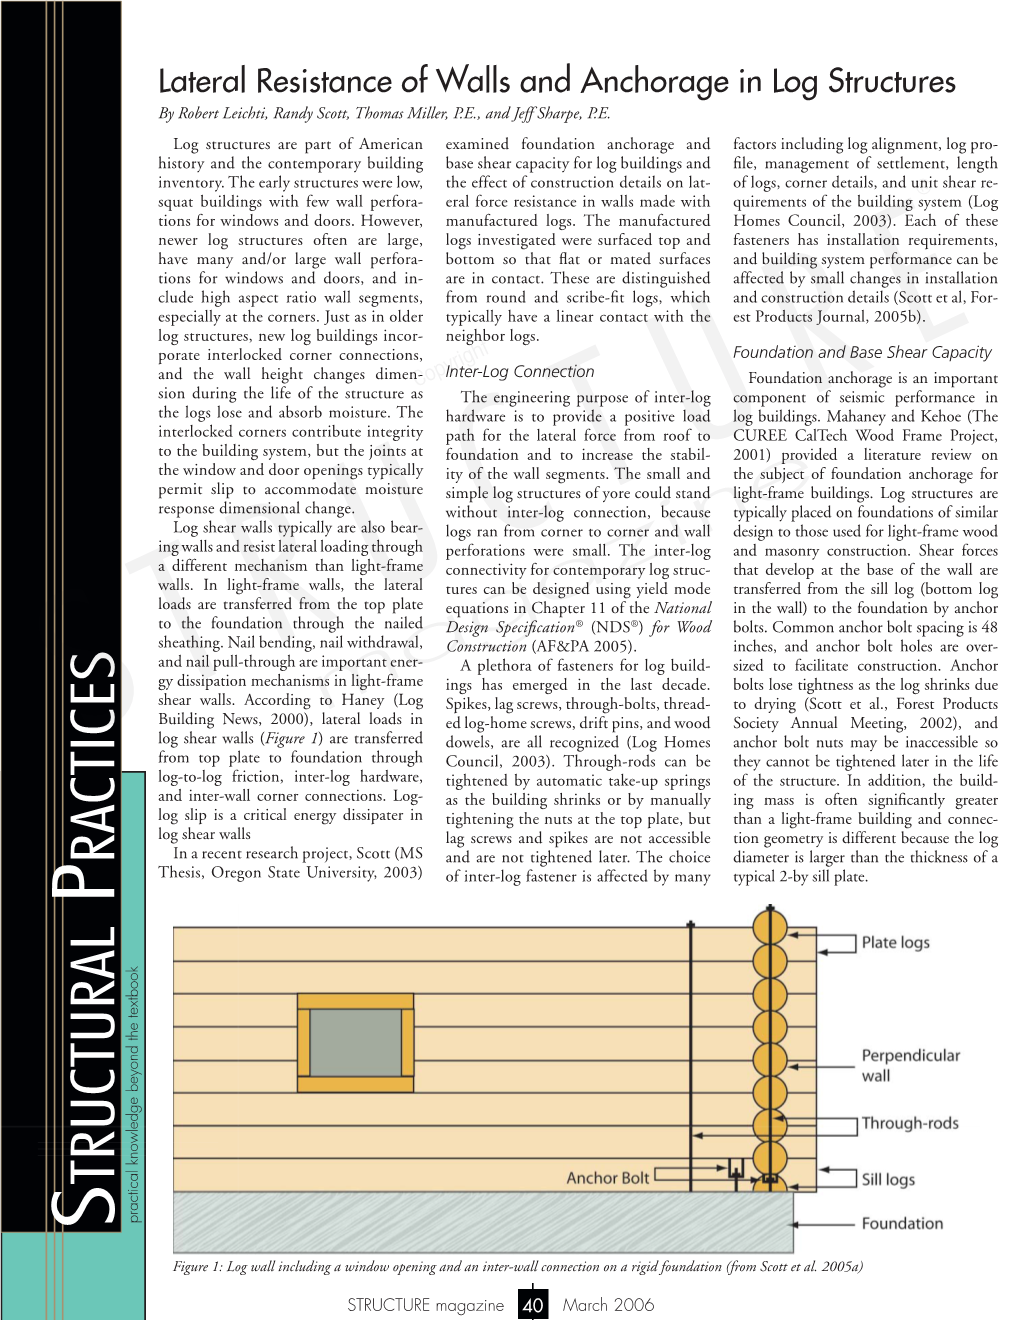 Lateral Resistance of Log Walls